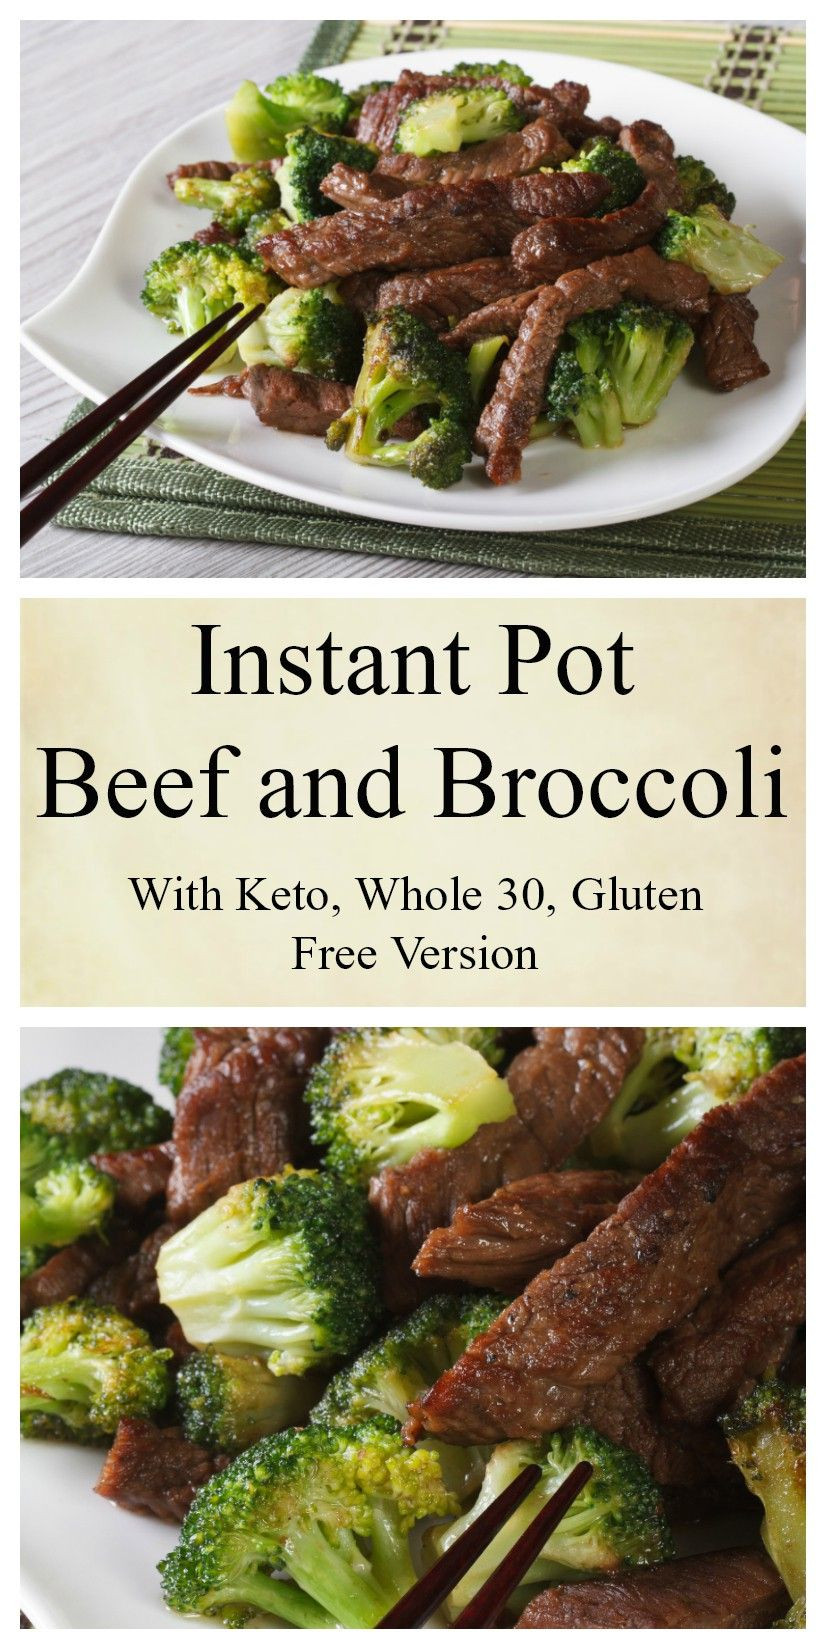 Beef And Broccoli Crock Pot Keto
 Instant Pot Beef and Broccoli with Keto Option